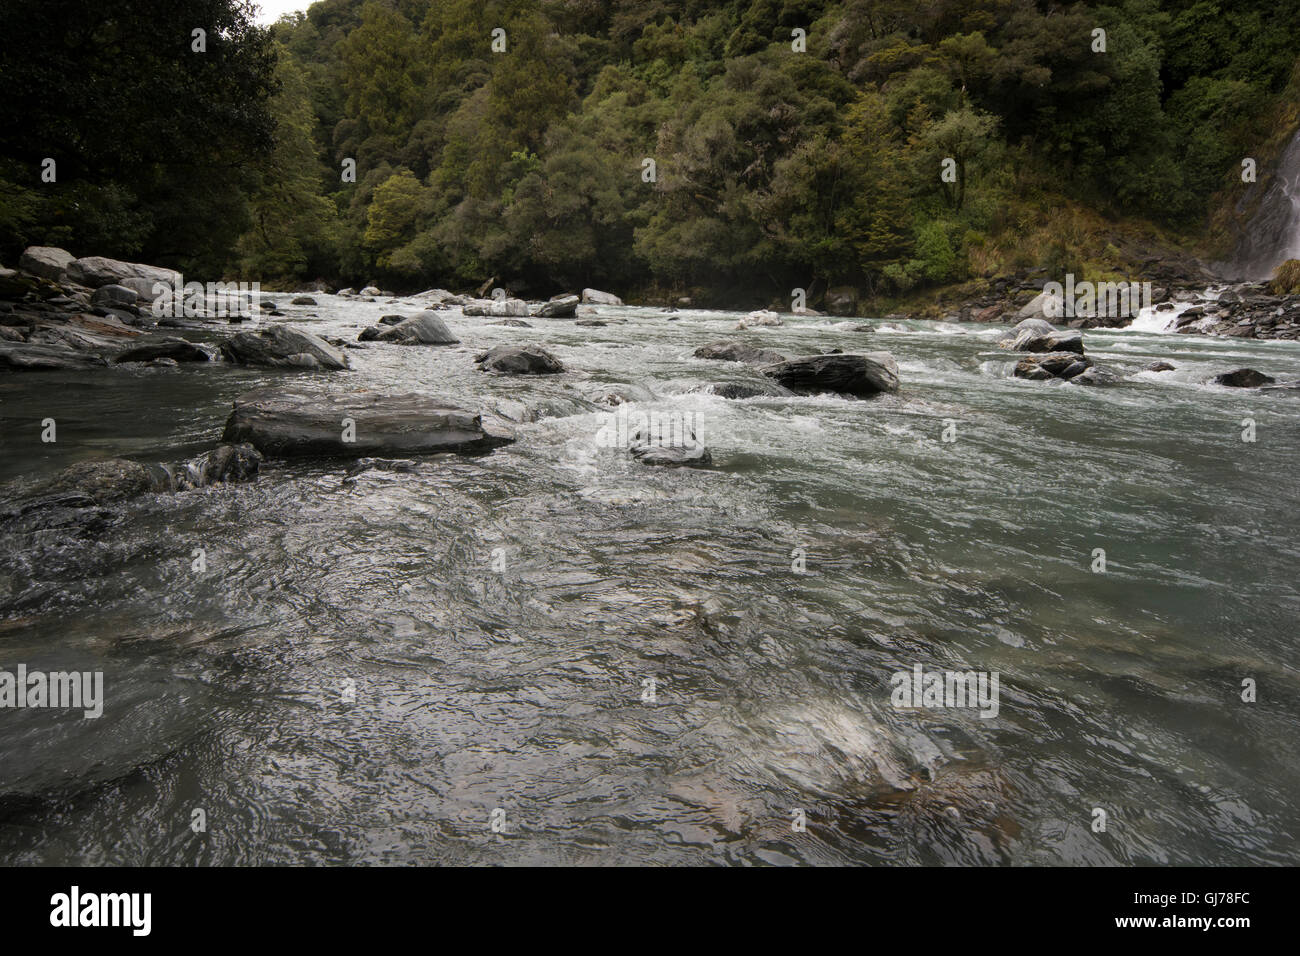 The Haast River is running as a clear mountain river in the Southern Alps of New Zealand. Stock Photo